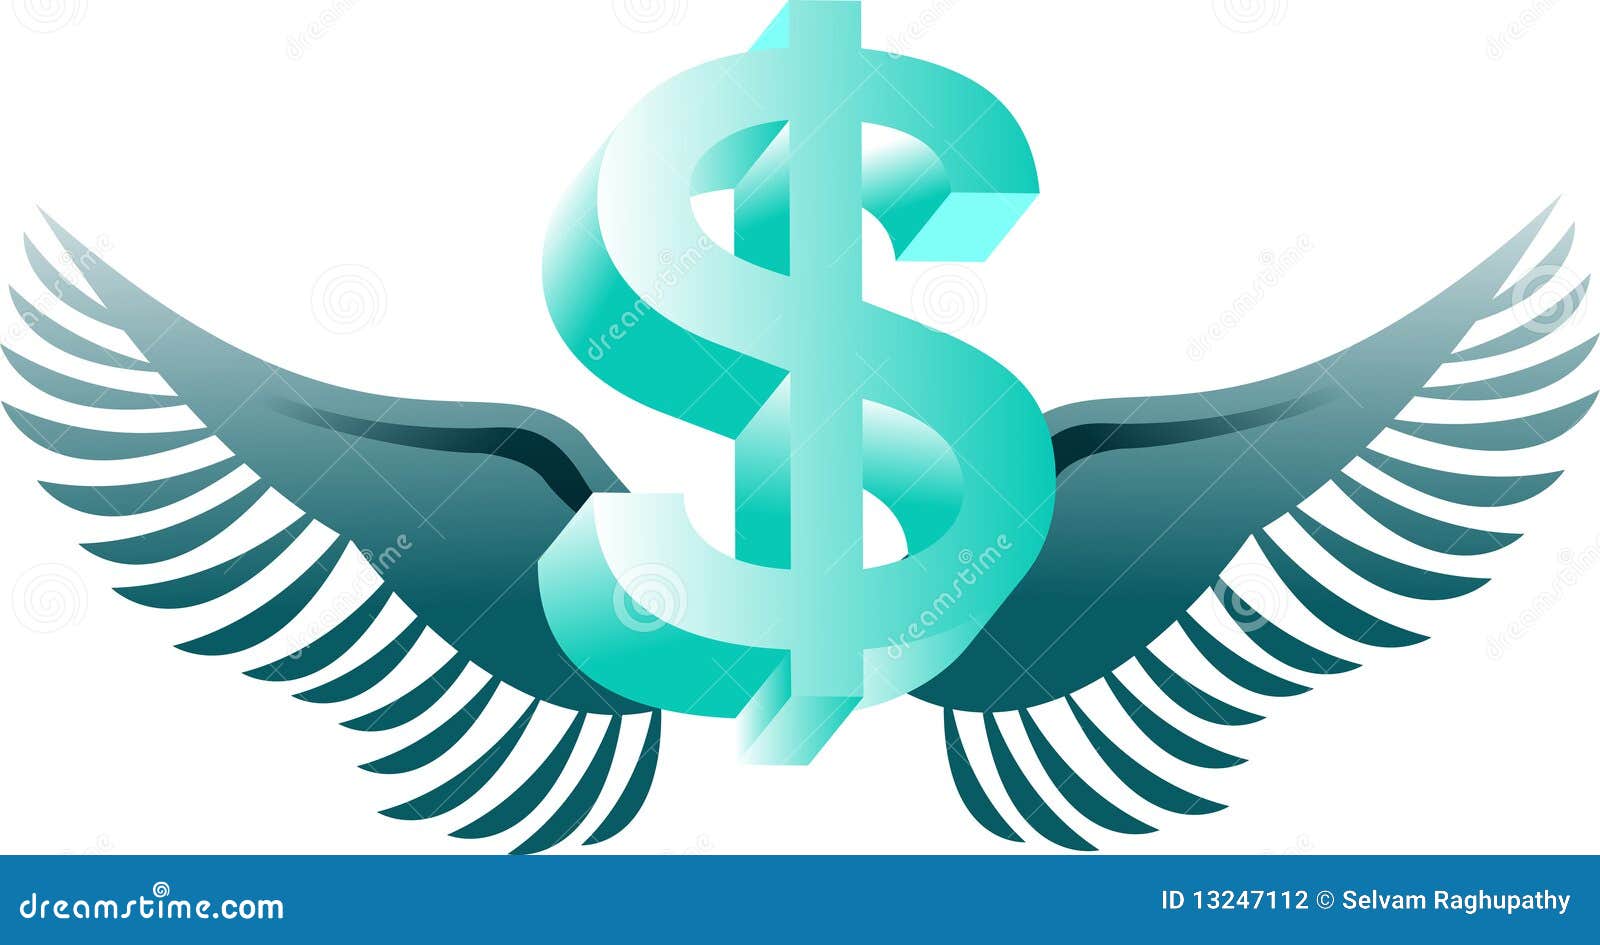 clipart money with wings - photo #13